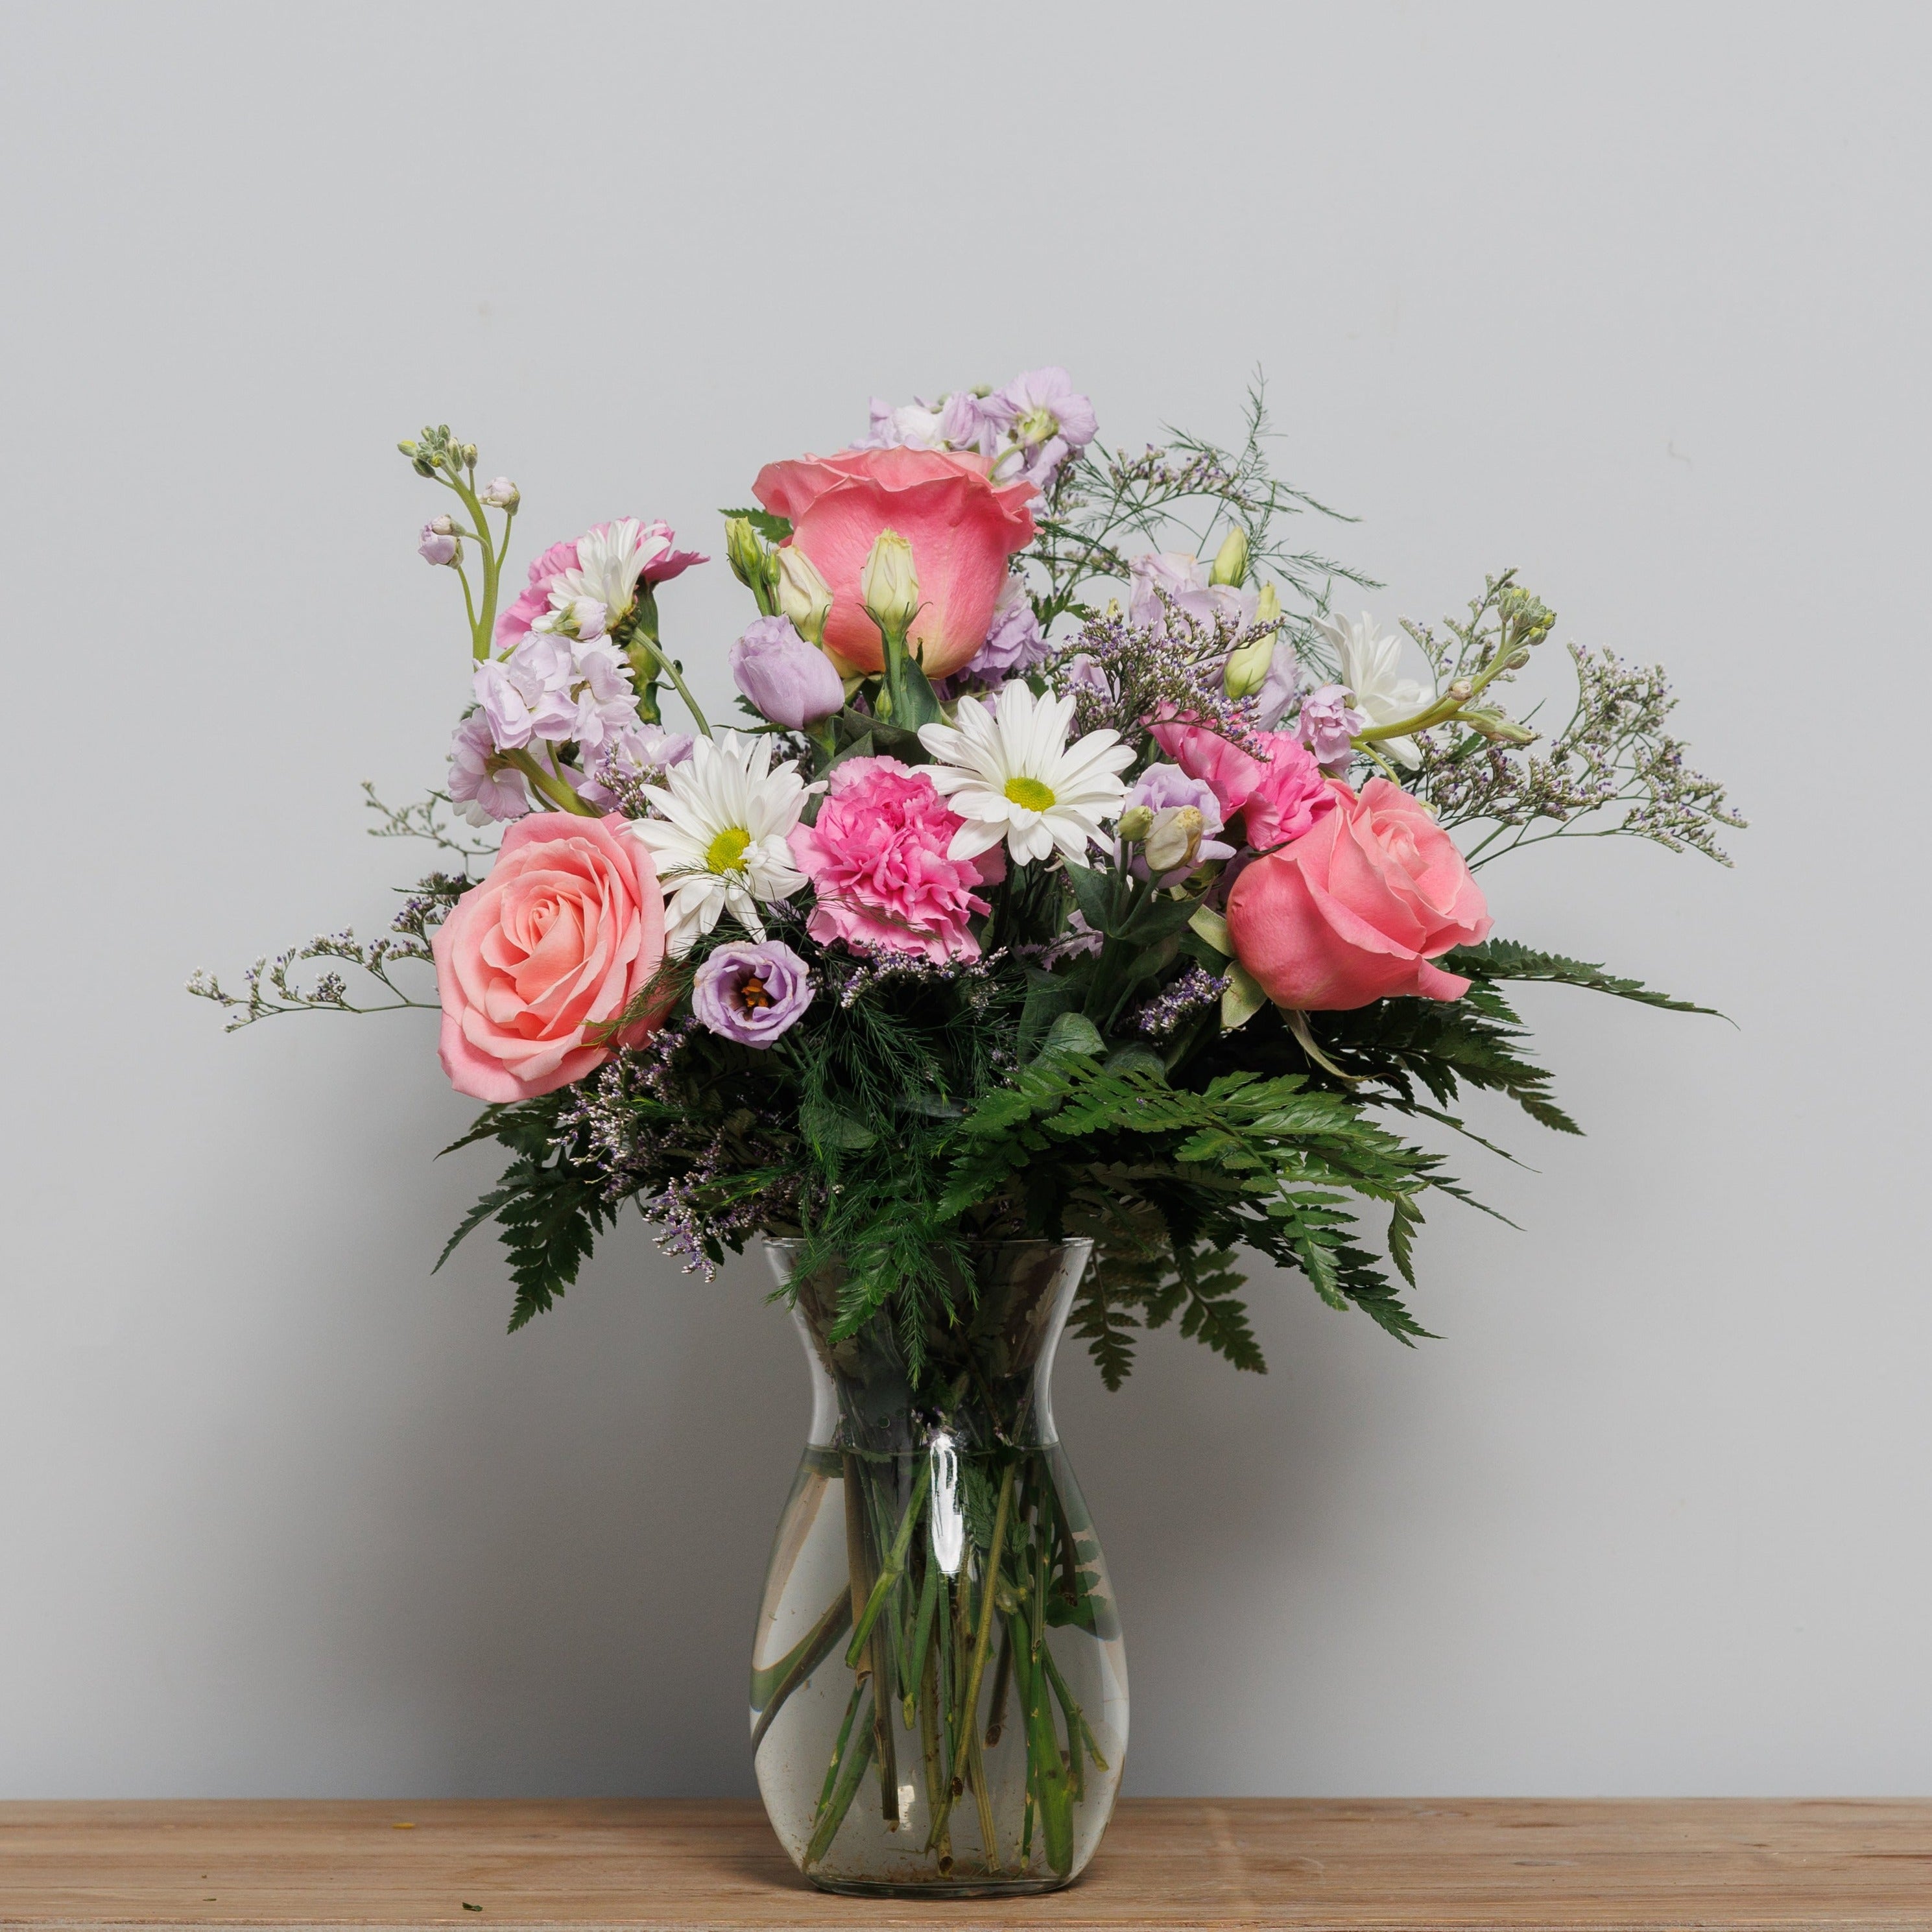 A vase arrangement with pink roses, white daisies and lavender stock